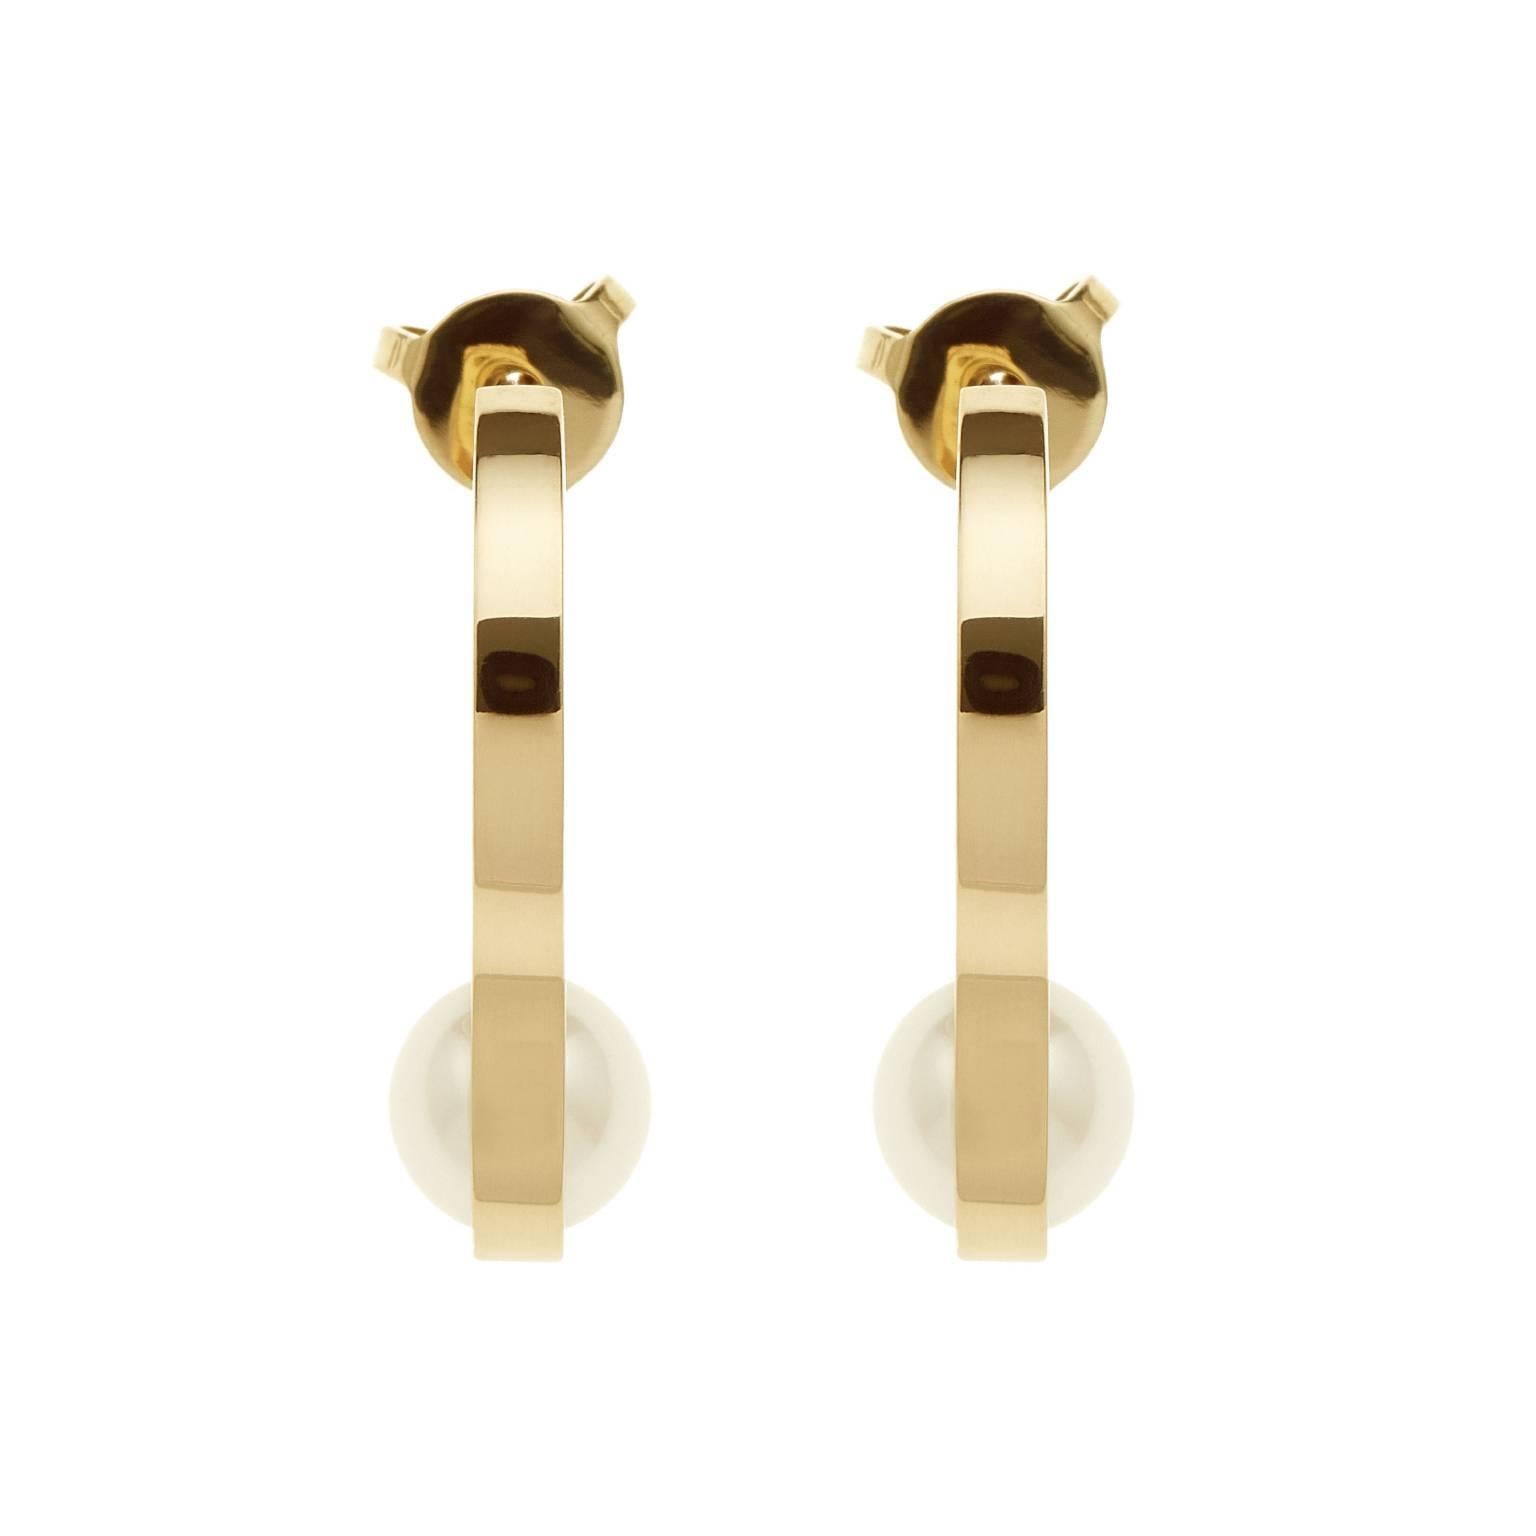 Realised by hand in Nathalie Jean's atelier, Nakkar Earrings pay homage to the pearl, a symbol of divinity, royalty and luxury that has fascinated and inspired since the dawn of time. A simple 18 karat gold band encircles the precious spheres to